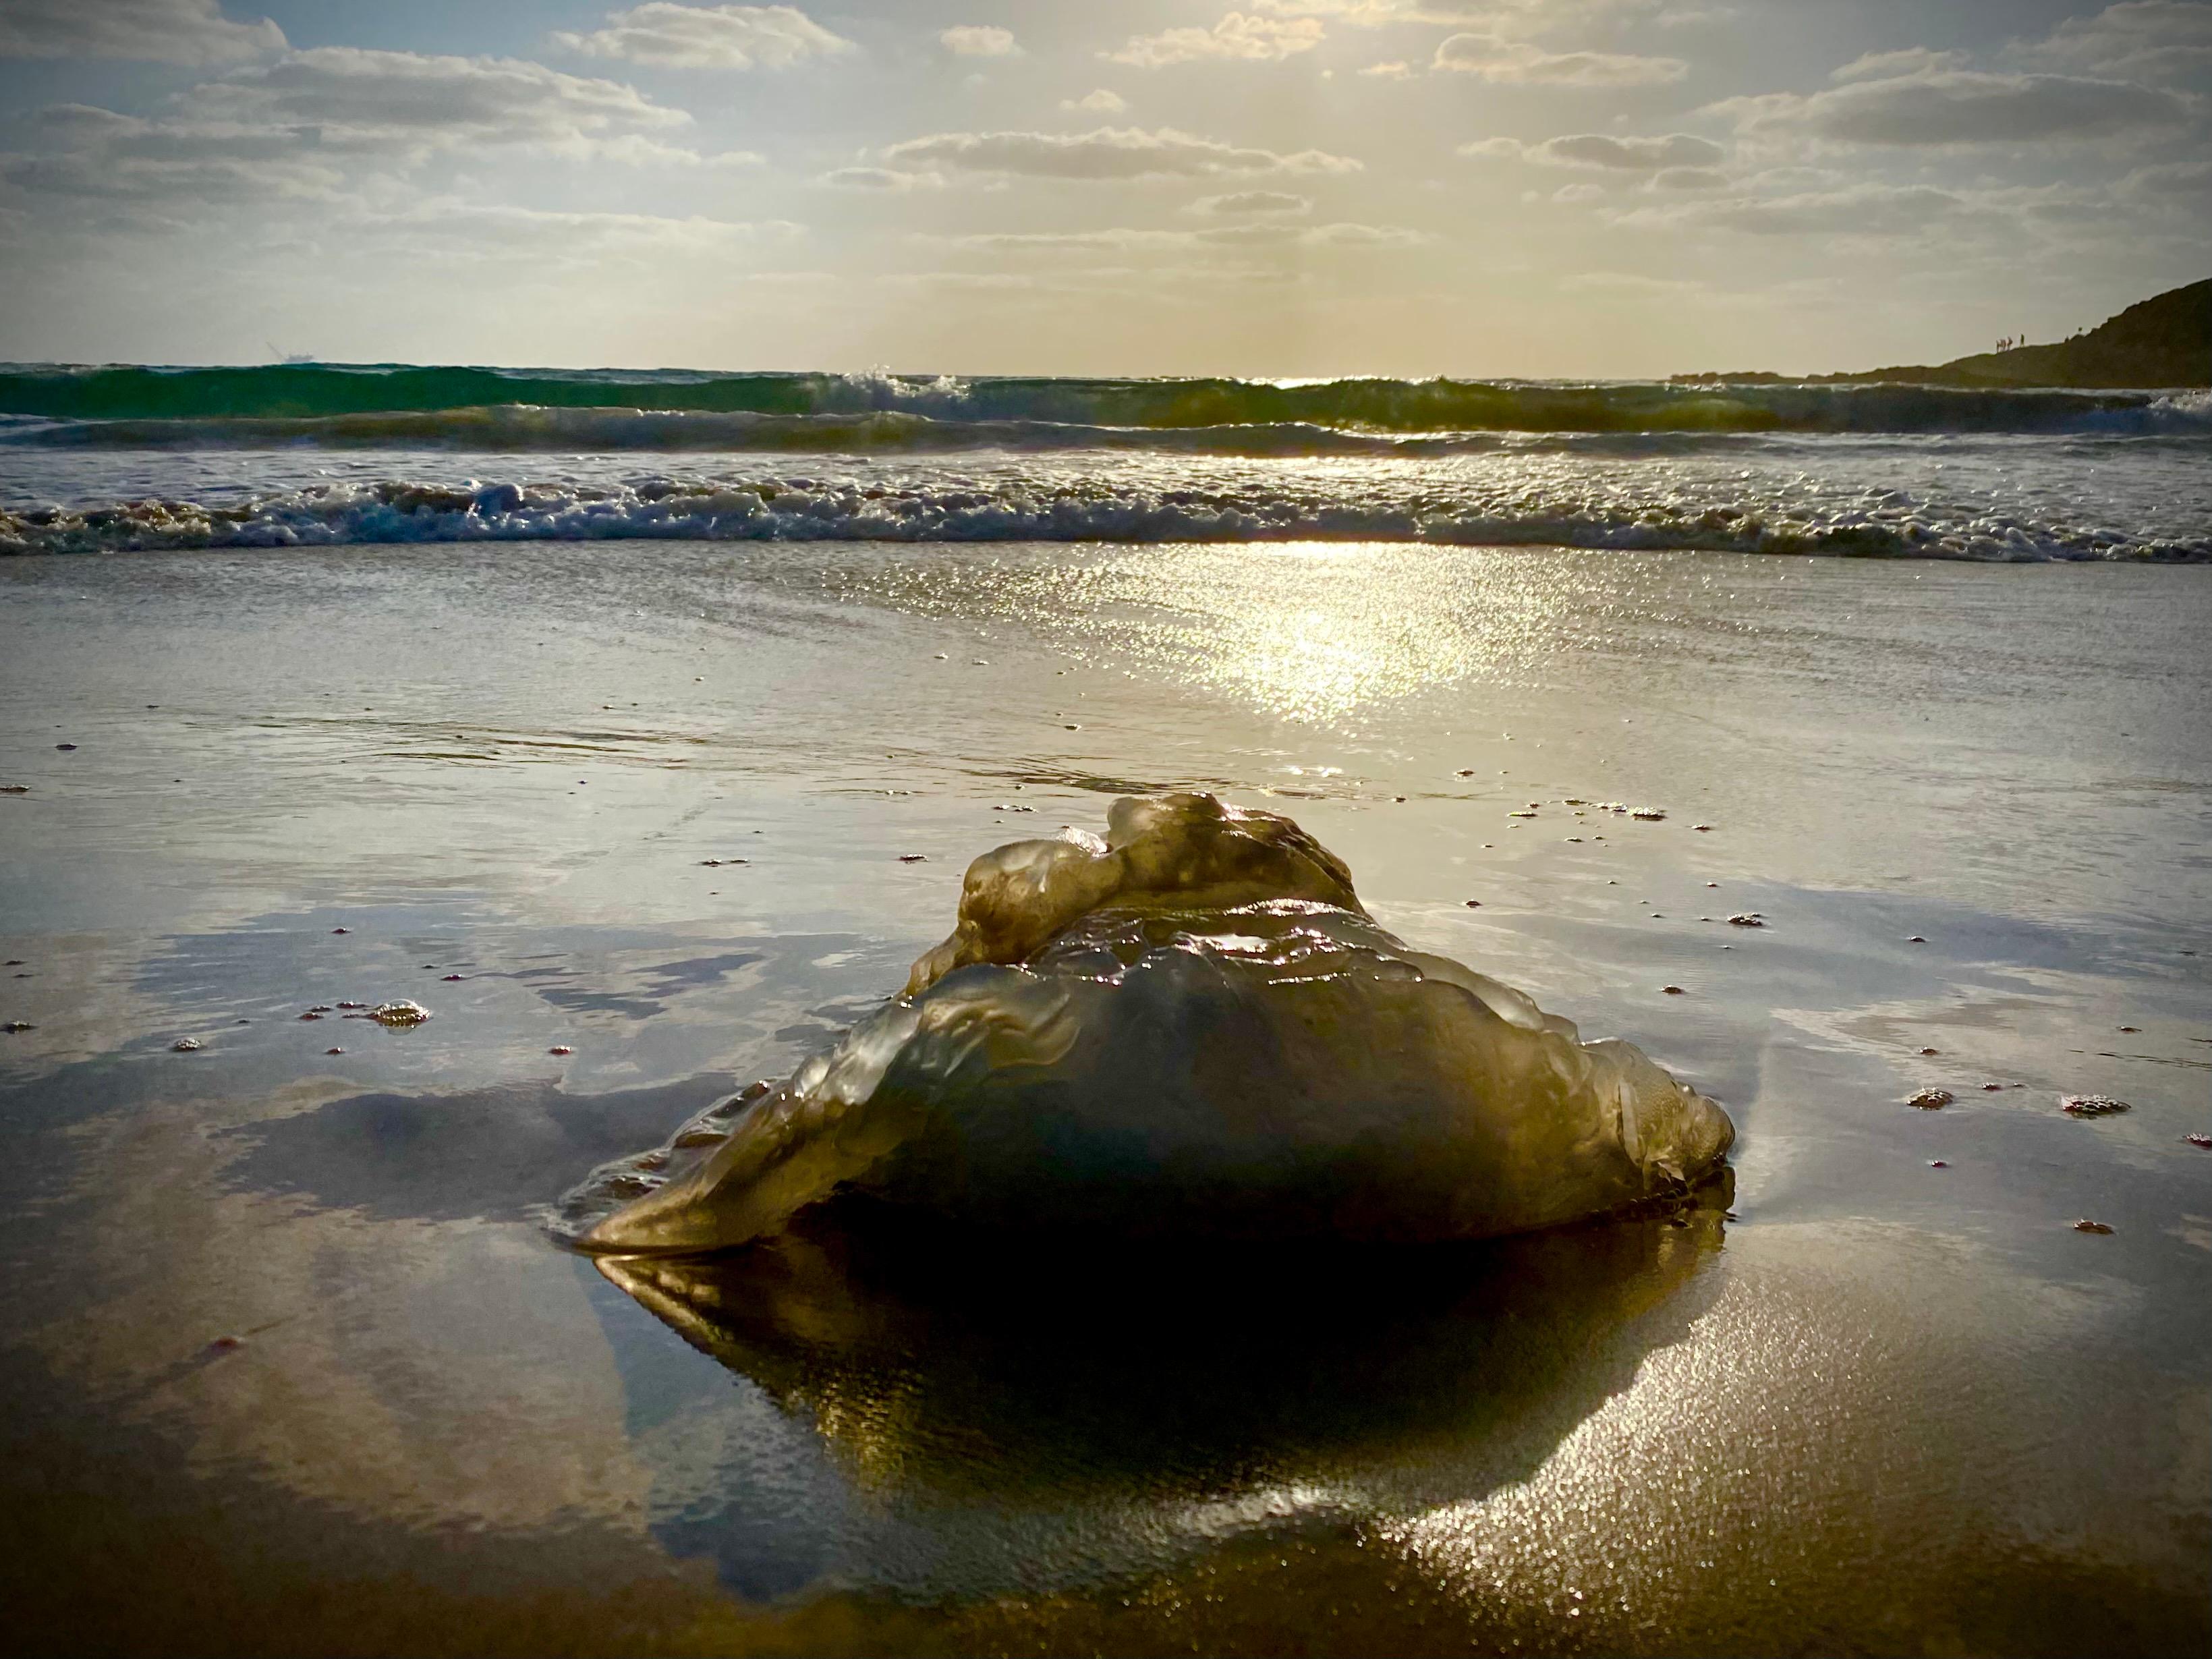 Chaya Vance 
Jellyfish at Mediterranean Dusk, 2020
Photograph, c-print on D-sec
60x81 cm
ed. 6

I am always observing, choosing to focus on the beauty in everything which surrounds me. As in life, I strive to take a “negative” and turn it into a